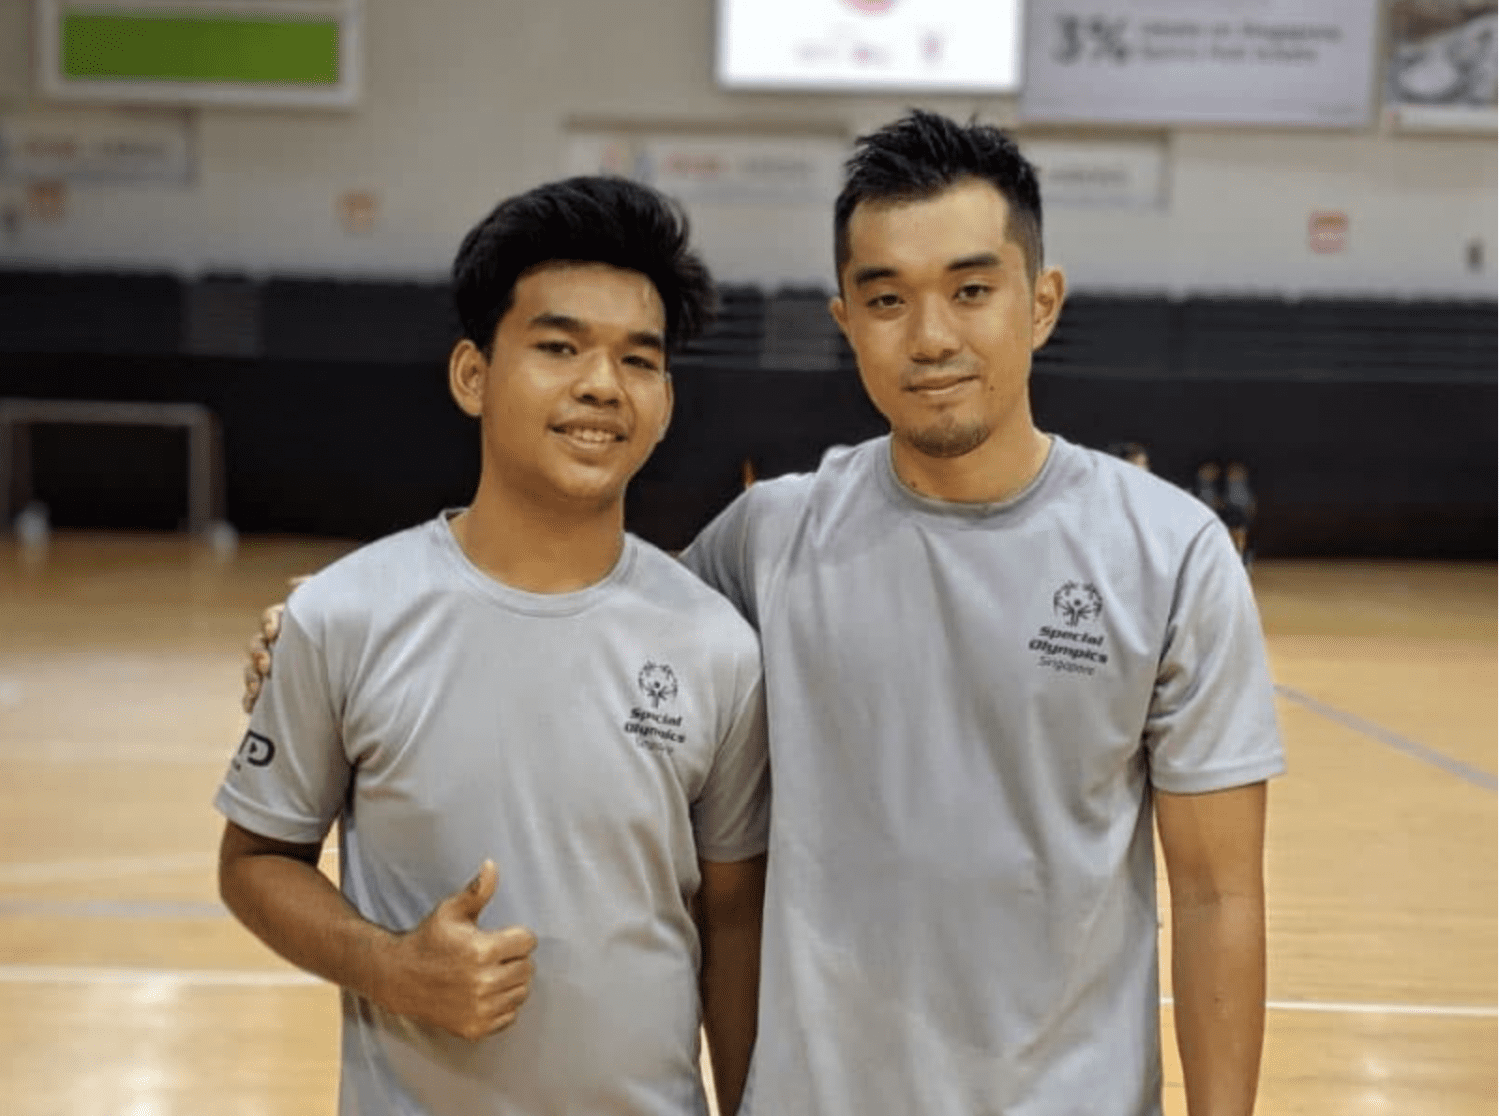 two males in grey shirts posing for the camera in an indoor sports hall